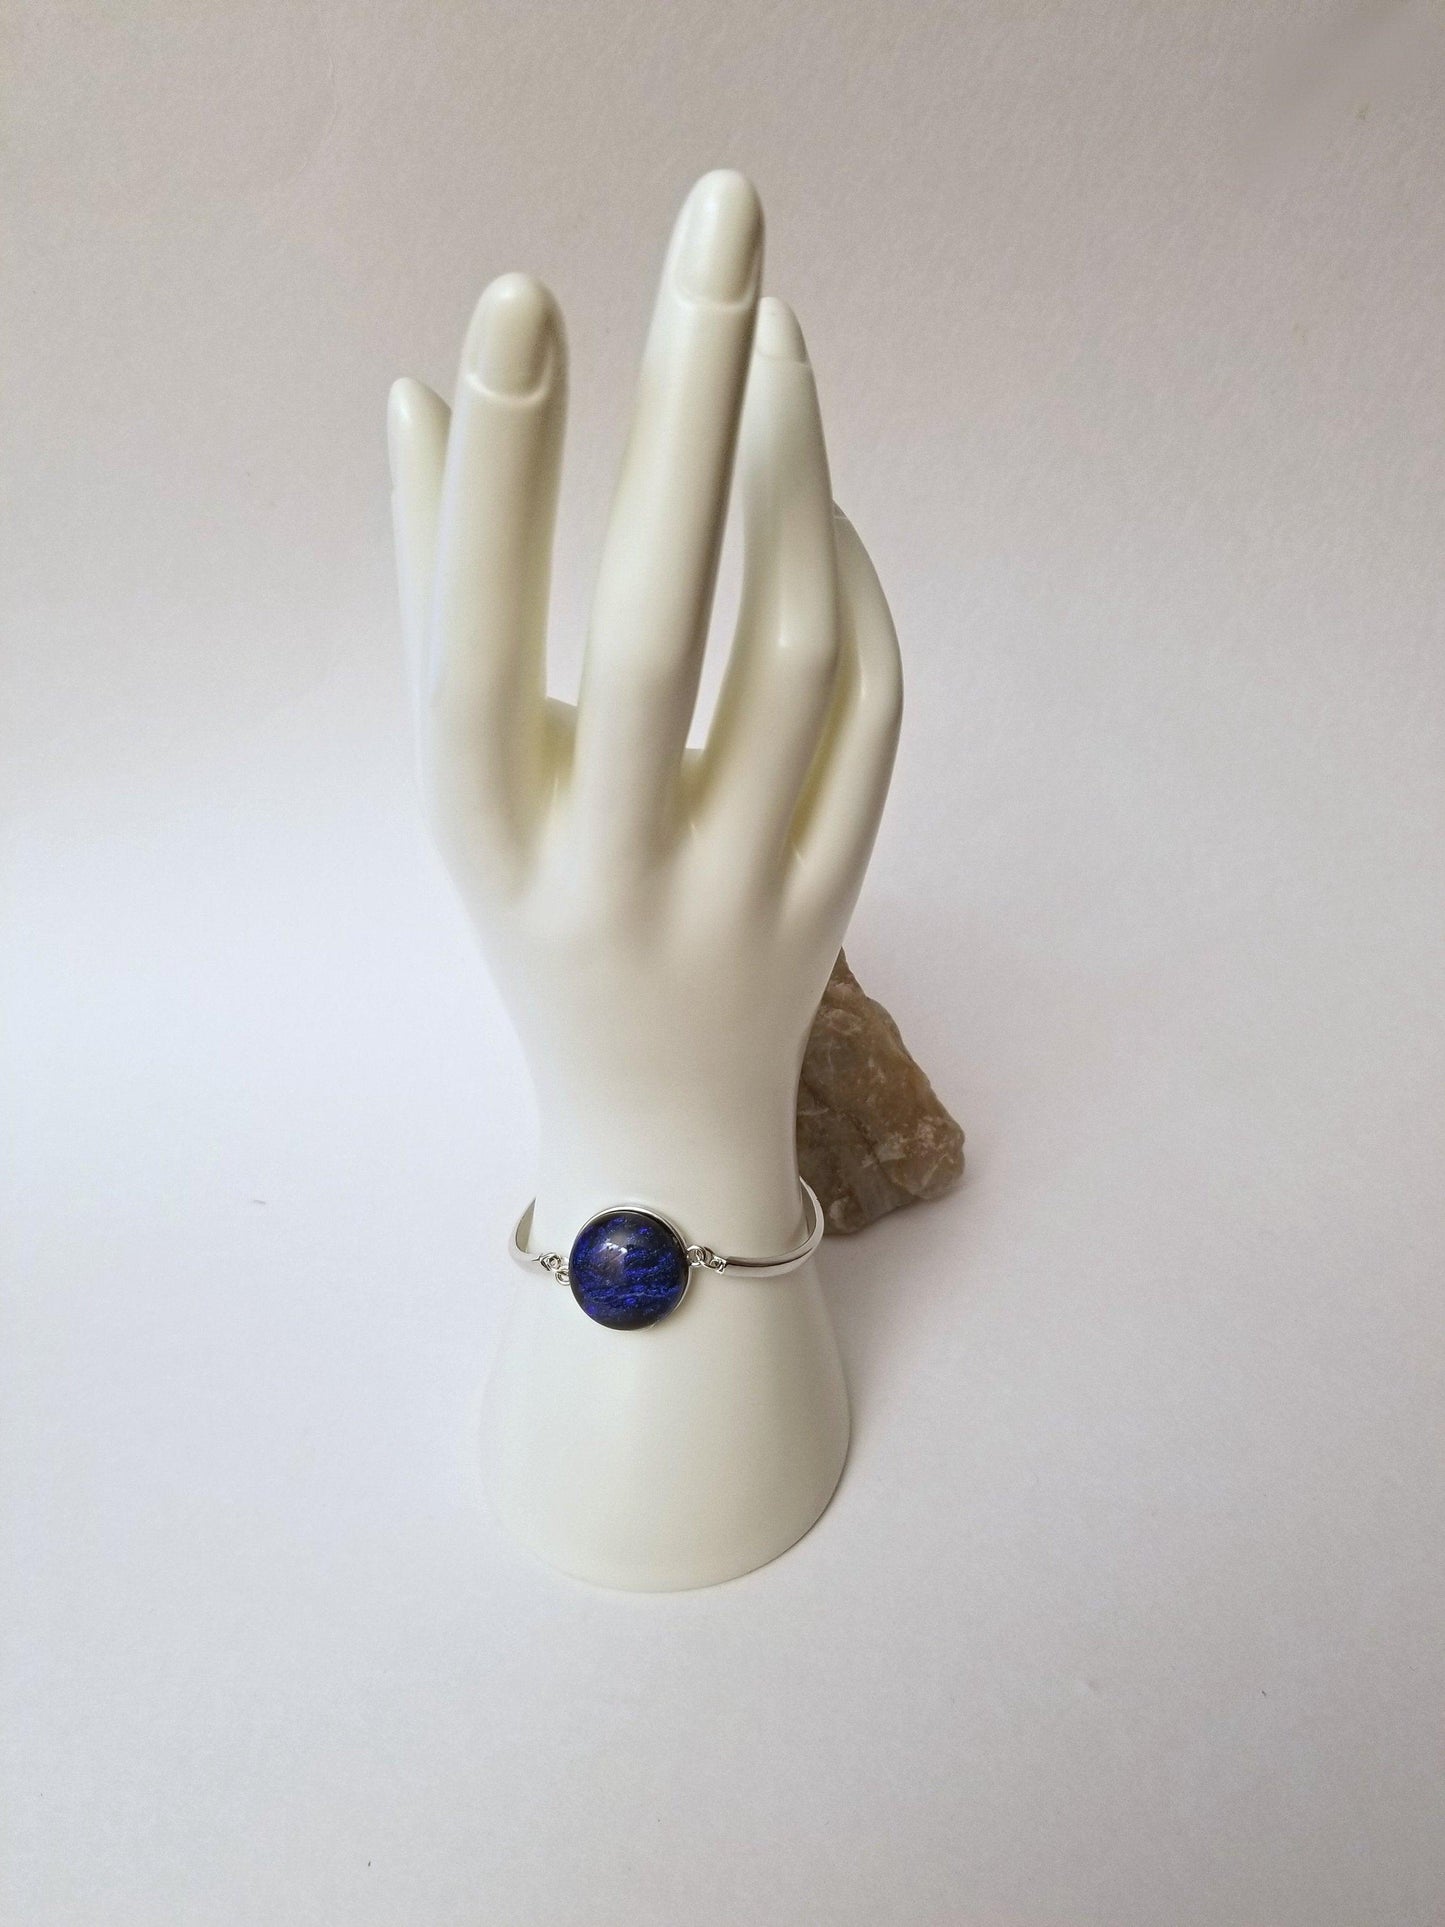 Delicate Adjustable Bracelet,  silver tone with Dichroic  Blue  wave  fused glass cabochon